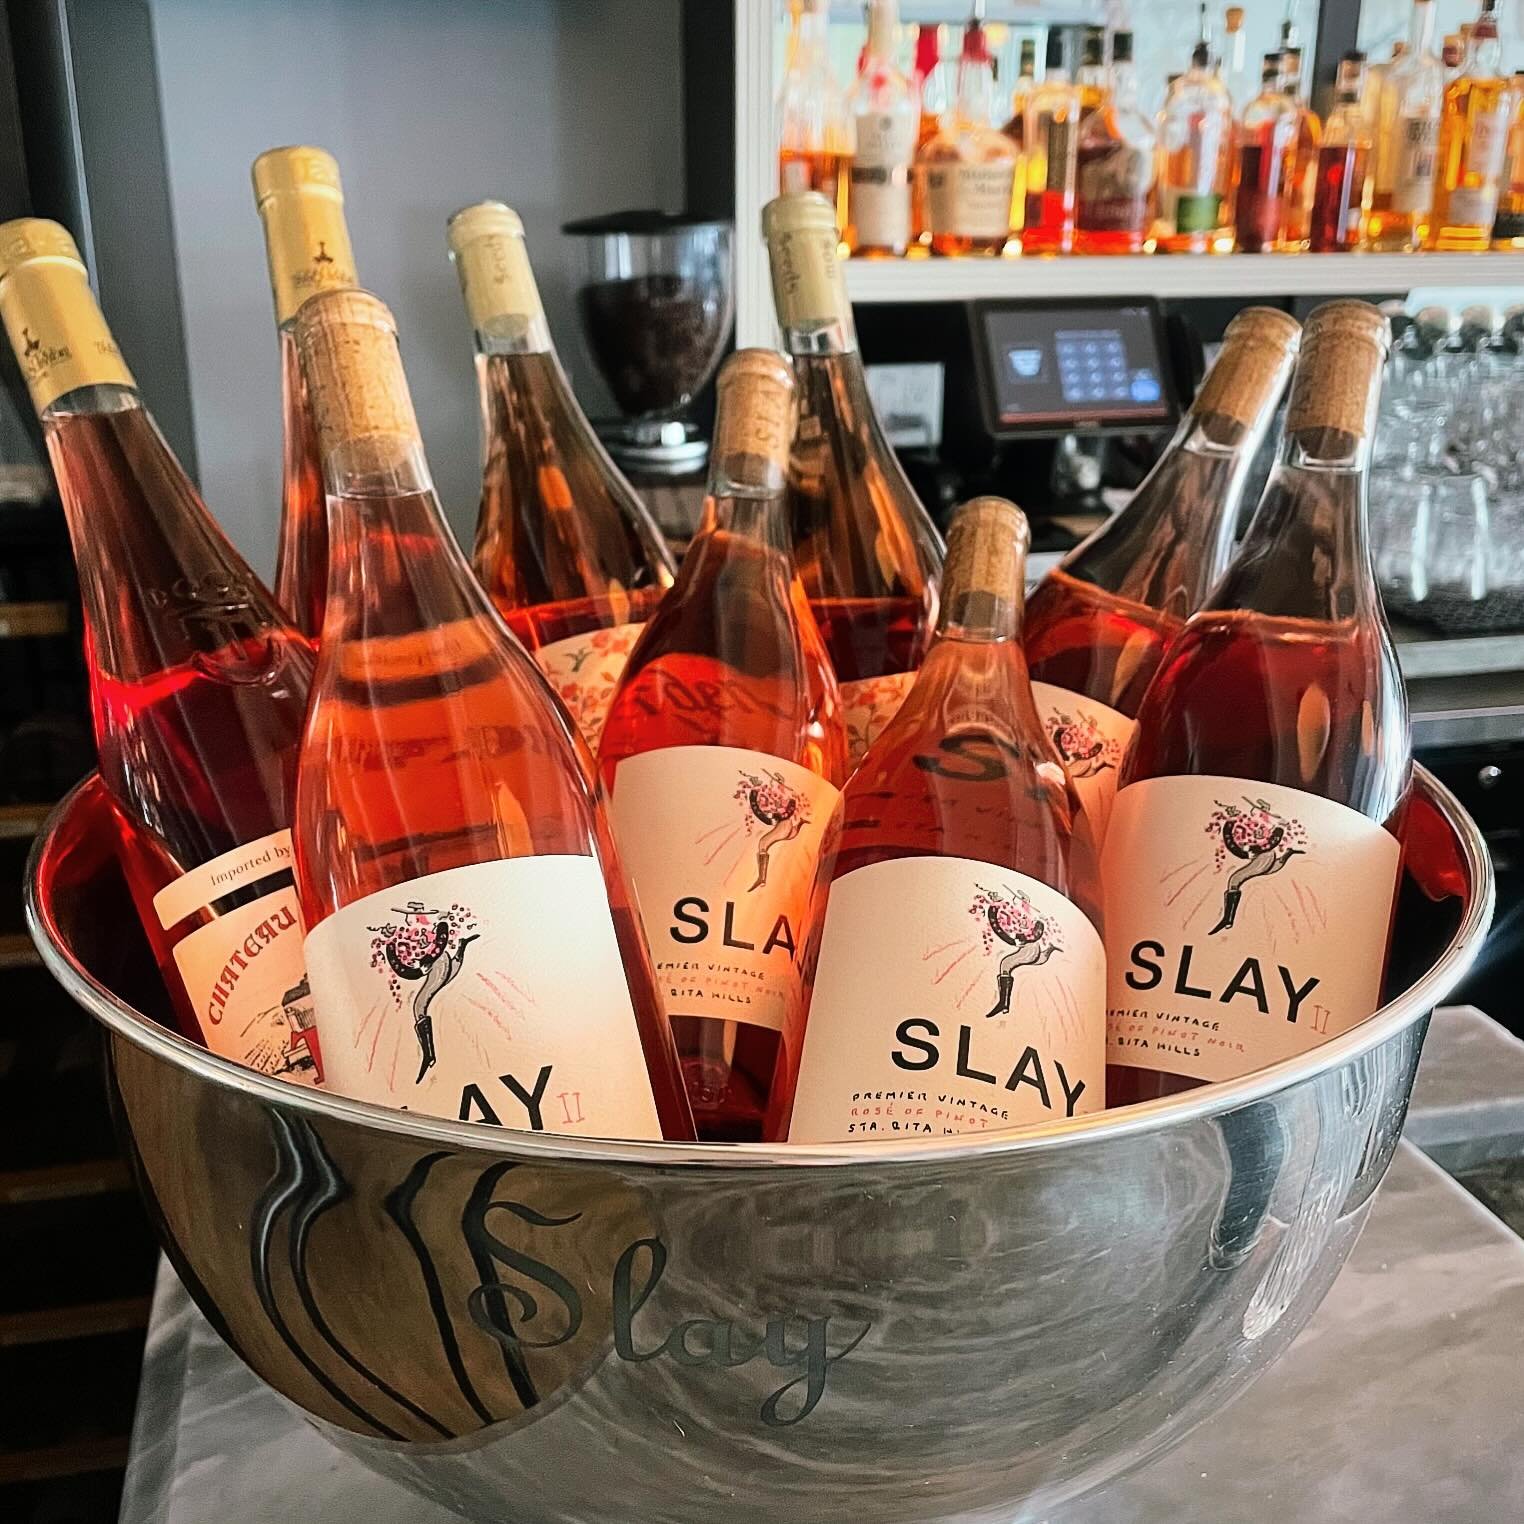 It&rsquo;s about that time!!! SLAY ROSE SEASON 🍷
.
.
.
.
.
#slay #rose #wine #summer #spring